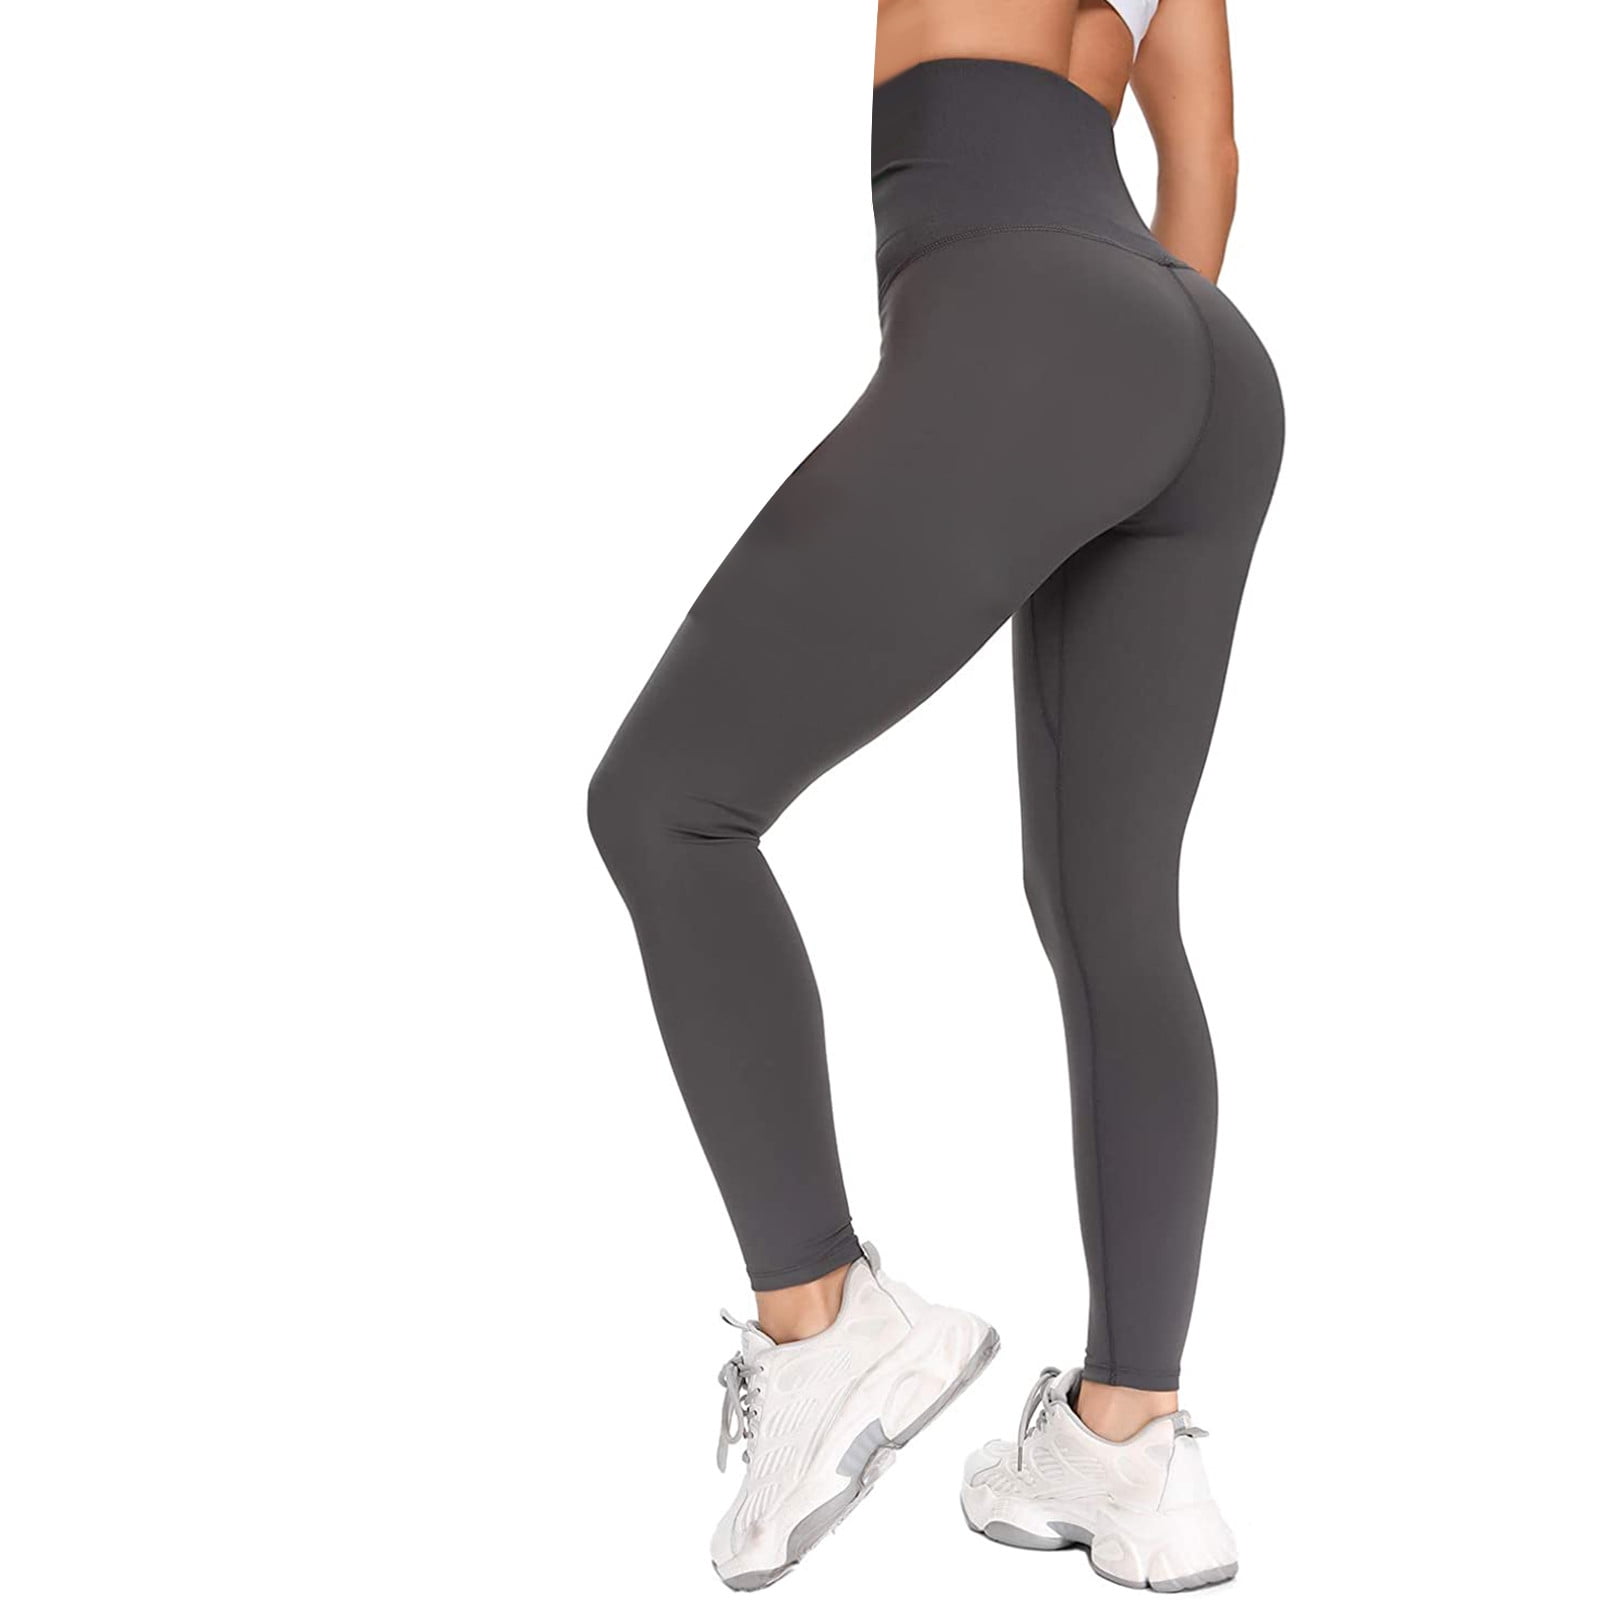 High Waist Yoga Seamless Workout Leggings For Women Elastic Gym Pants For  Fitness And Overall Wear In Muilt Colors Black, Gray, And Pink From  Clothes0708, $16.09